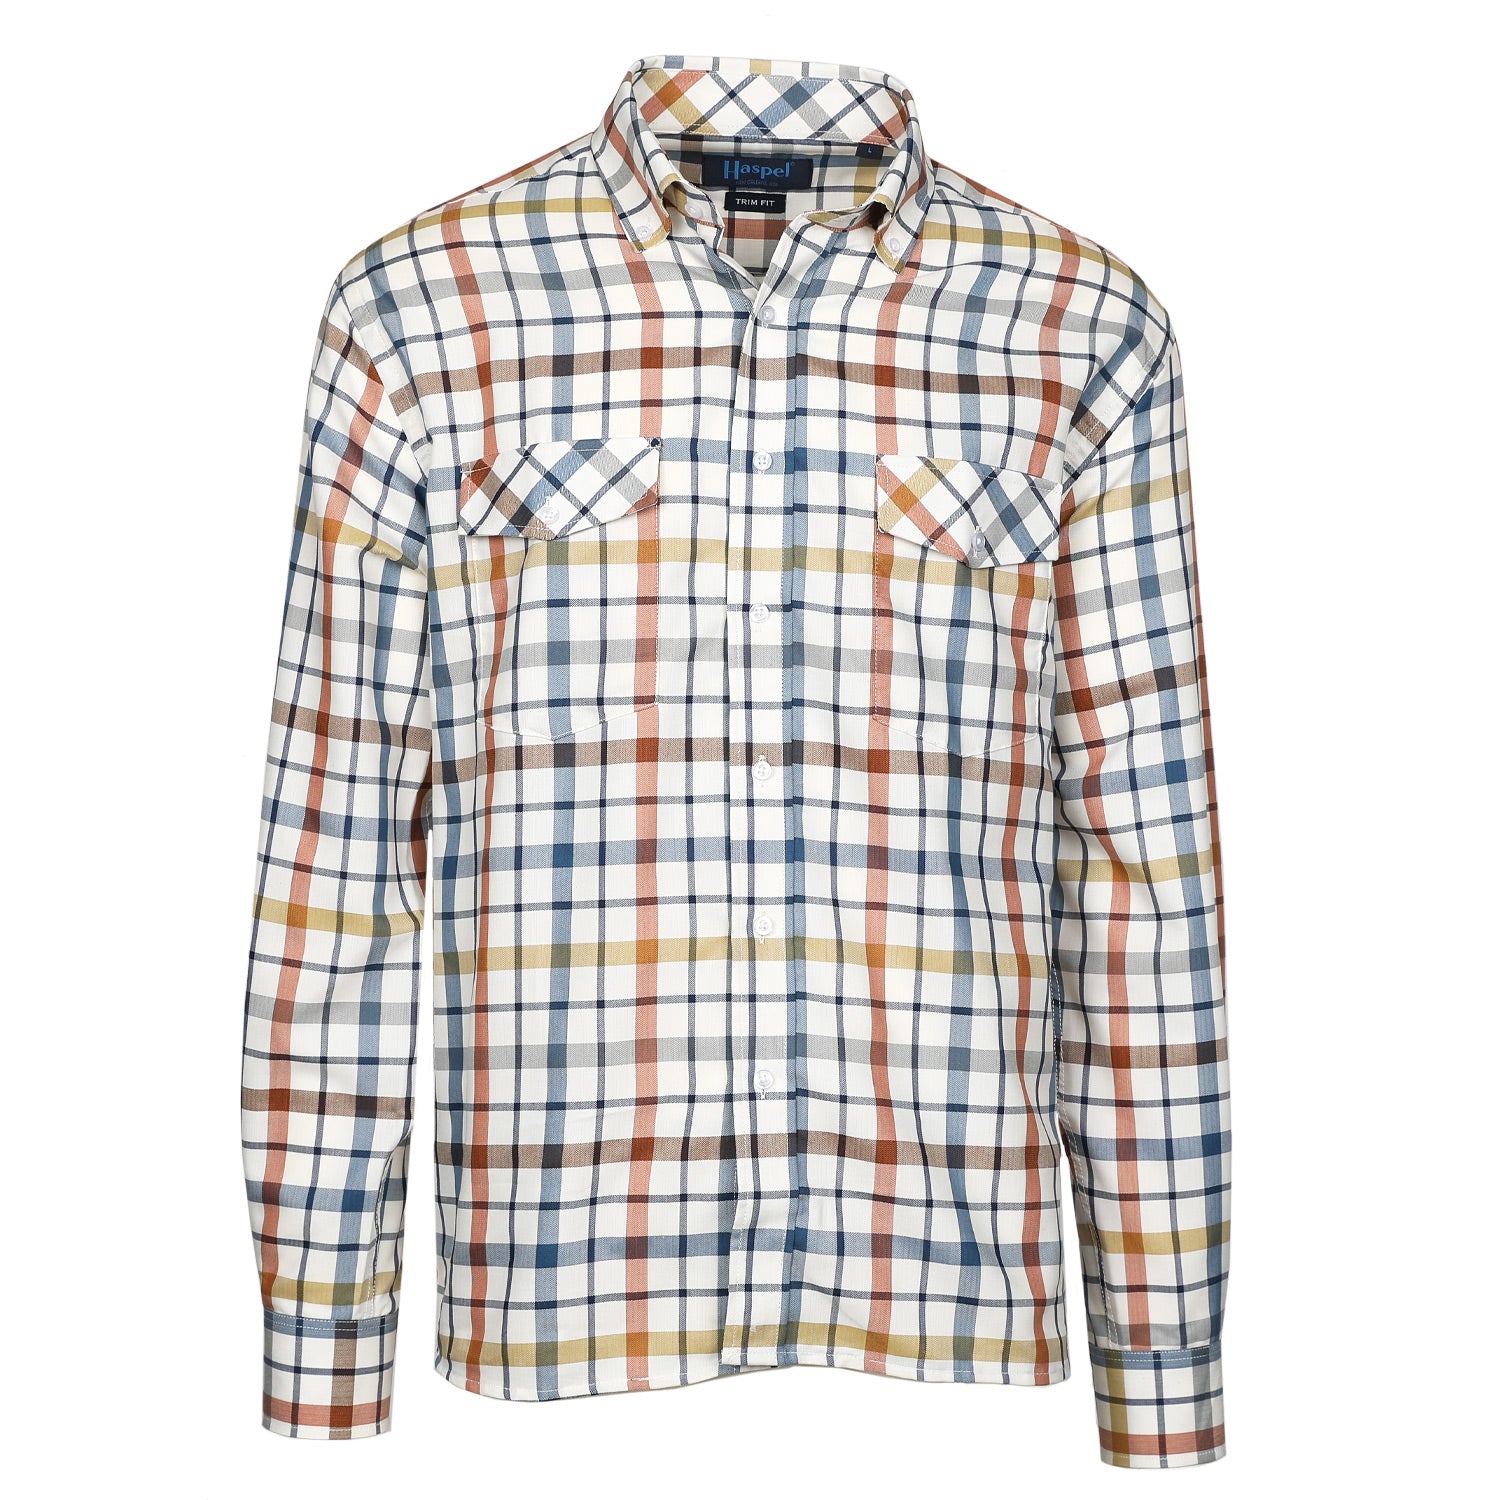 Rock the rustic vibes with Apres Blue, Brown & Rust Brushed Cotton Check. This cozy plaid shirt features an eye-catching blue, brown, and rust colorway that's perfect for channeling New Orleans style. Be prepared to make a statement any time you wear it.  100% Cotton • Button Down Collar • Long Sleeve • Double Chest Pocket • Machine Washable • Made in Italy • Return Policy